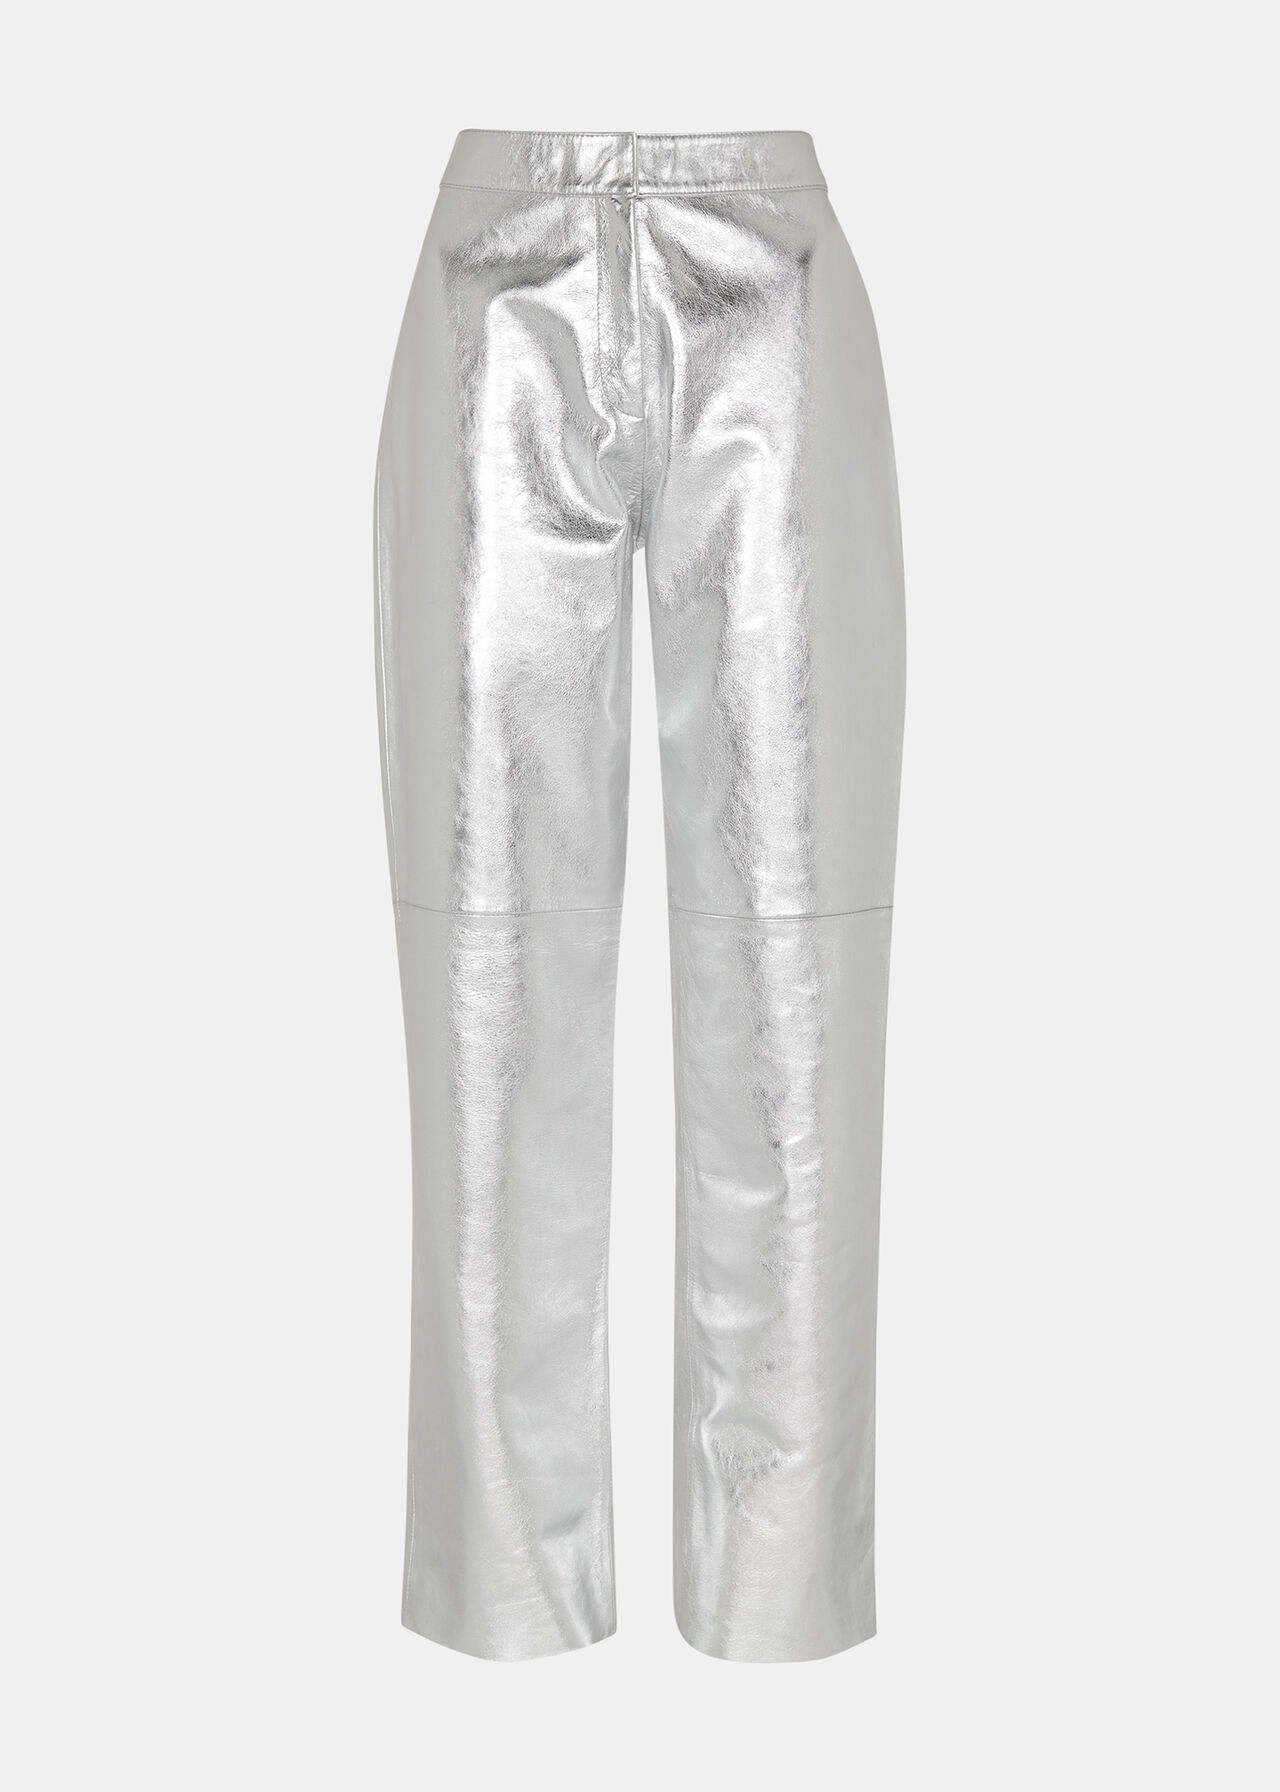 Busy Clothing Womens Smart Silver Grey Trousers